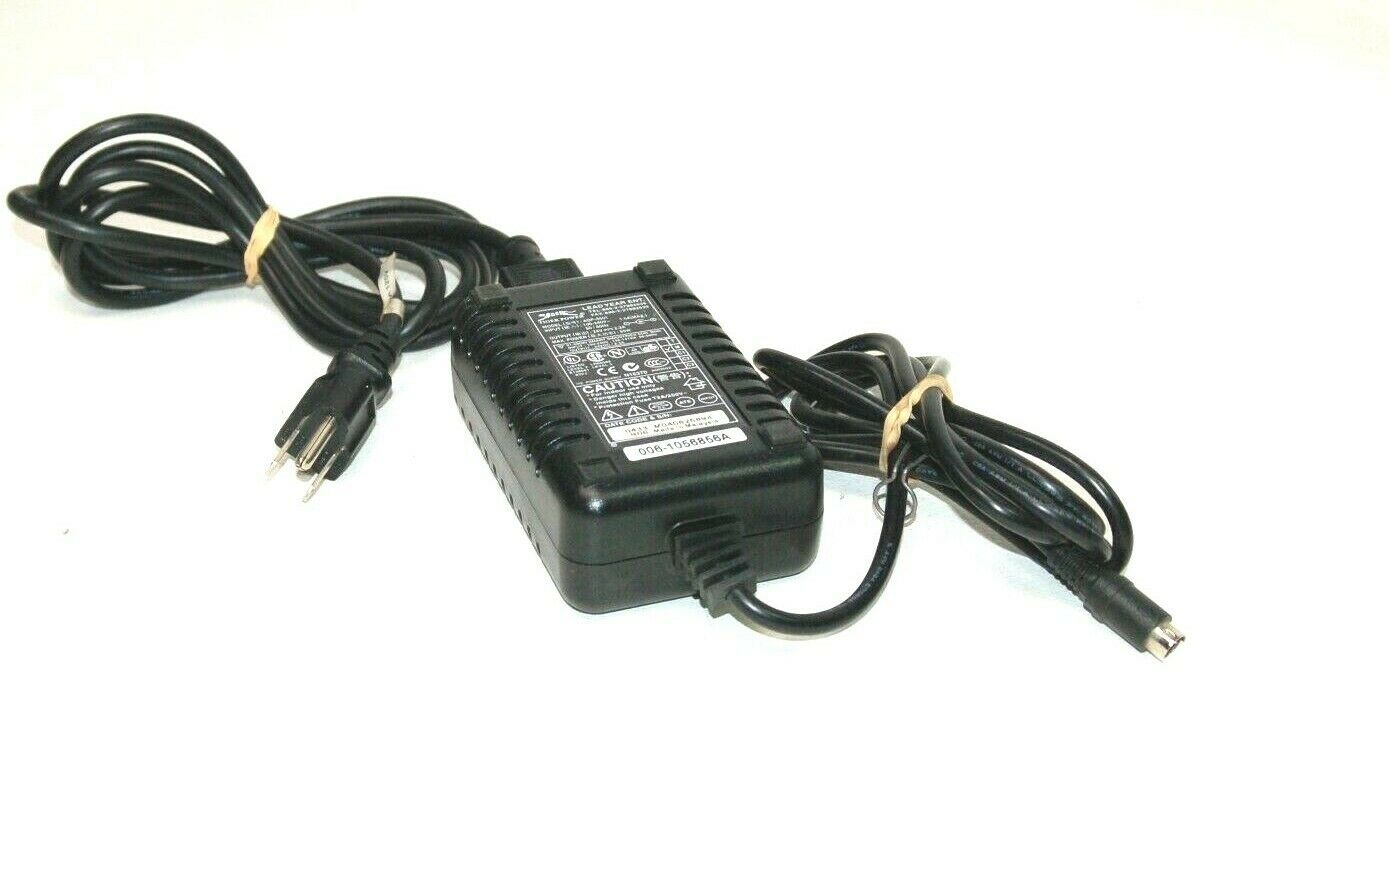 Genuine Tiger Power NCR 24V 2.3A 55W 3-PIN AC Adapter Power Supply ADP-5501 Compatible Brand: Tiger POwer Maximum Out - Click Image to Close